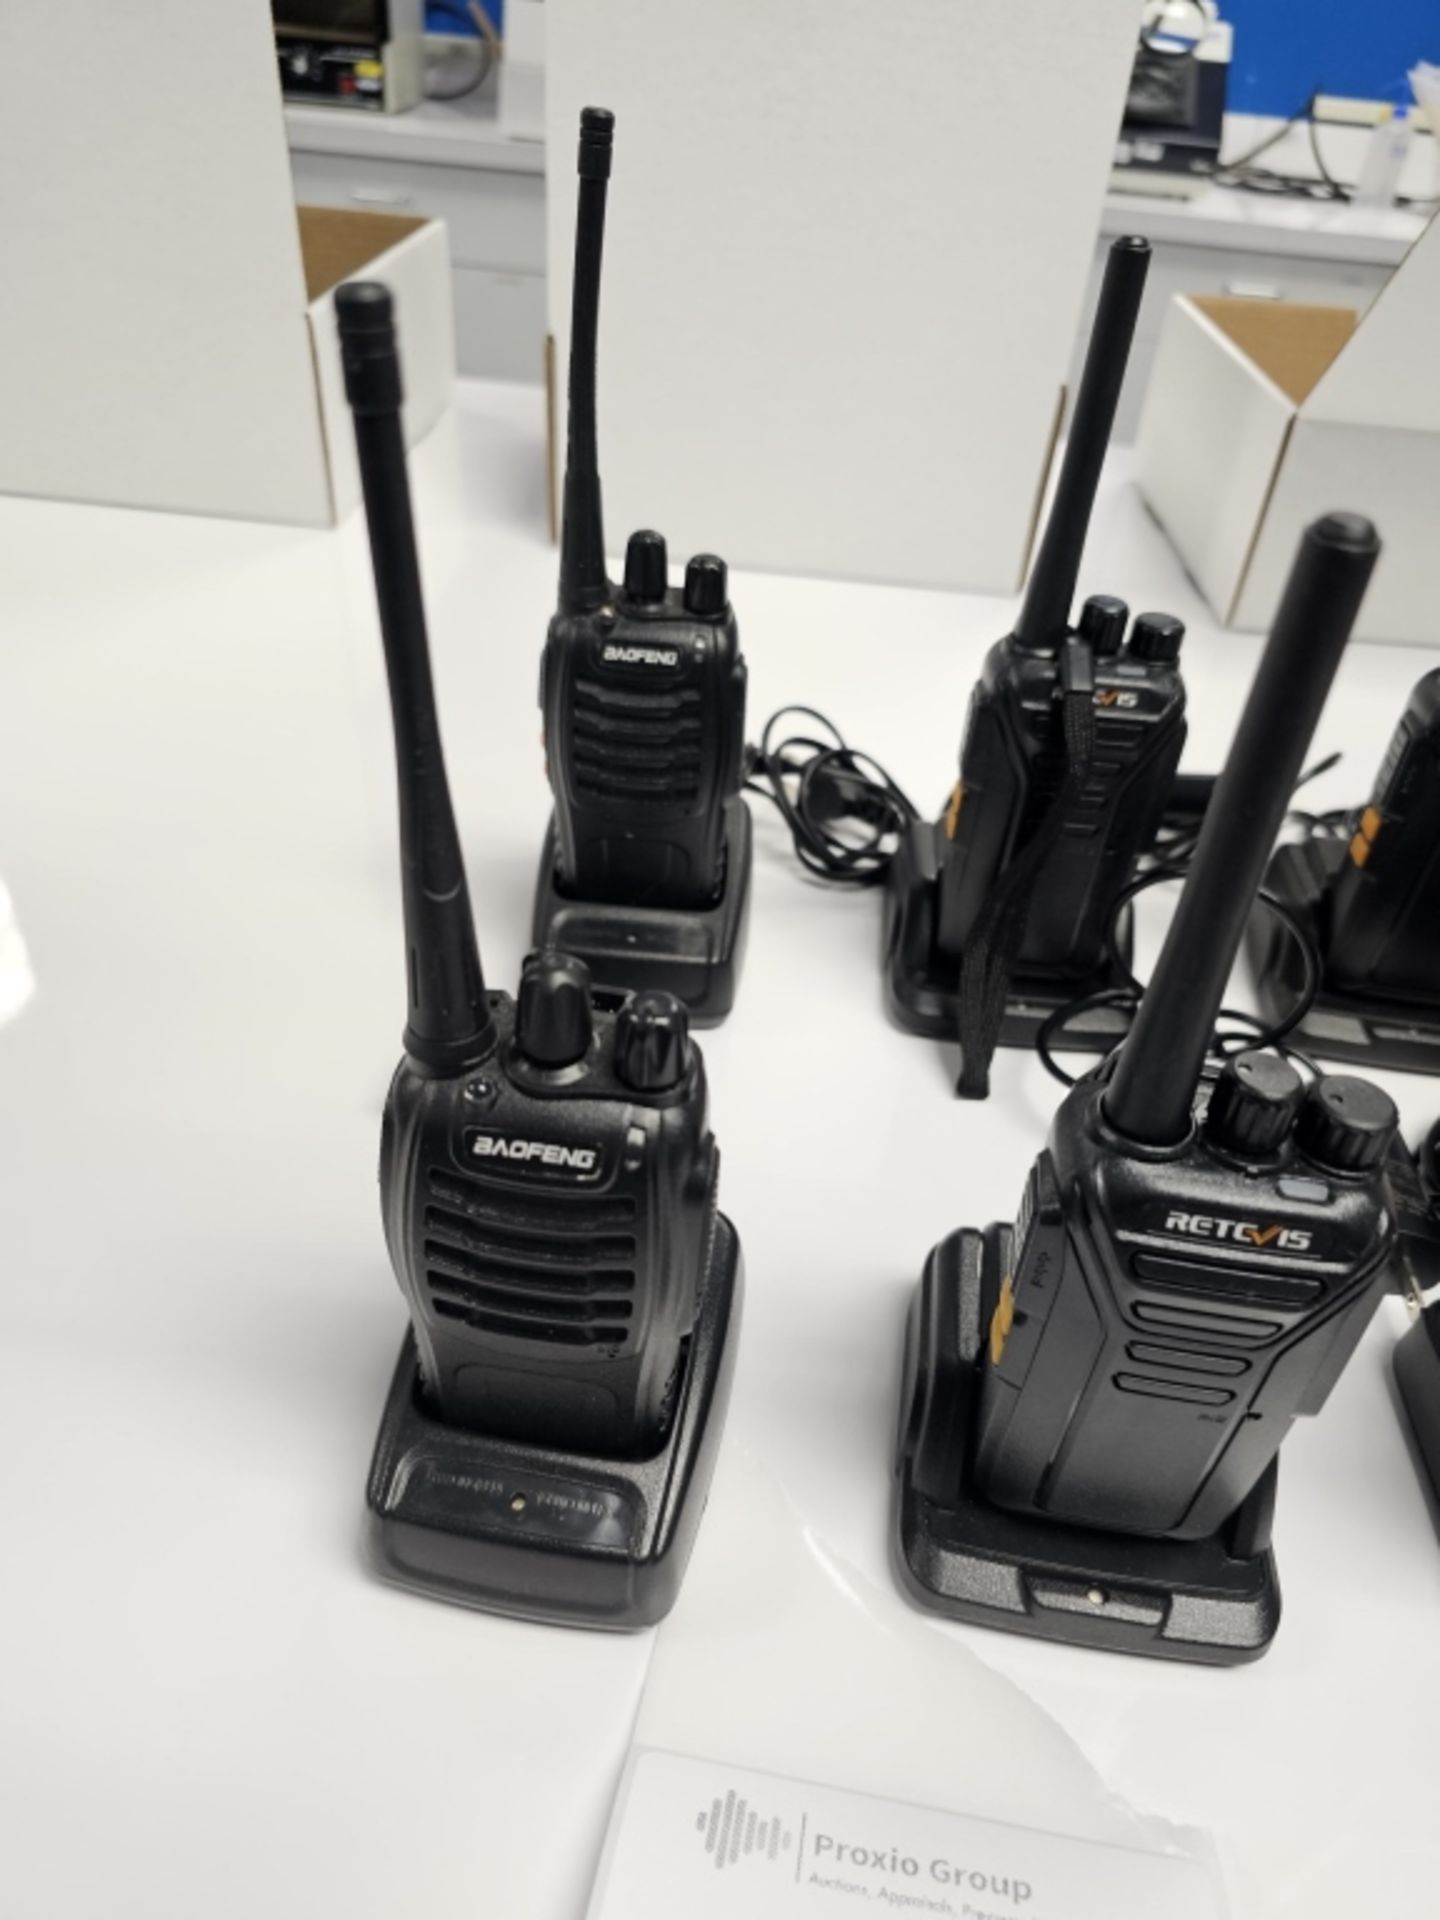 (5) Retcvis Hand Held Walkie Talkies With (4) Chargers, (2) Baofeng Walkie Talkies With Chargers - Image 3 of 5